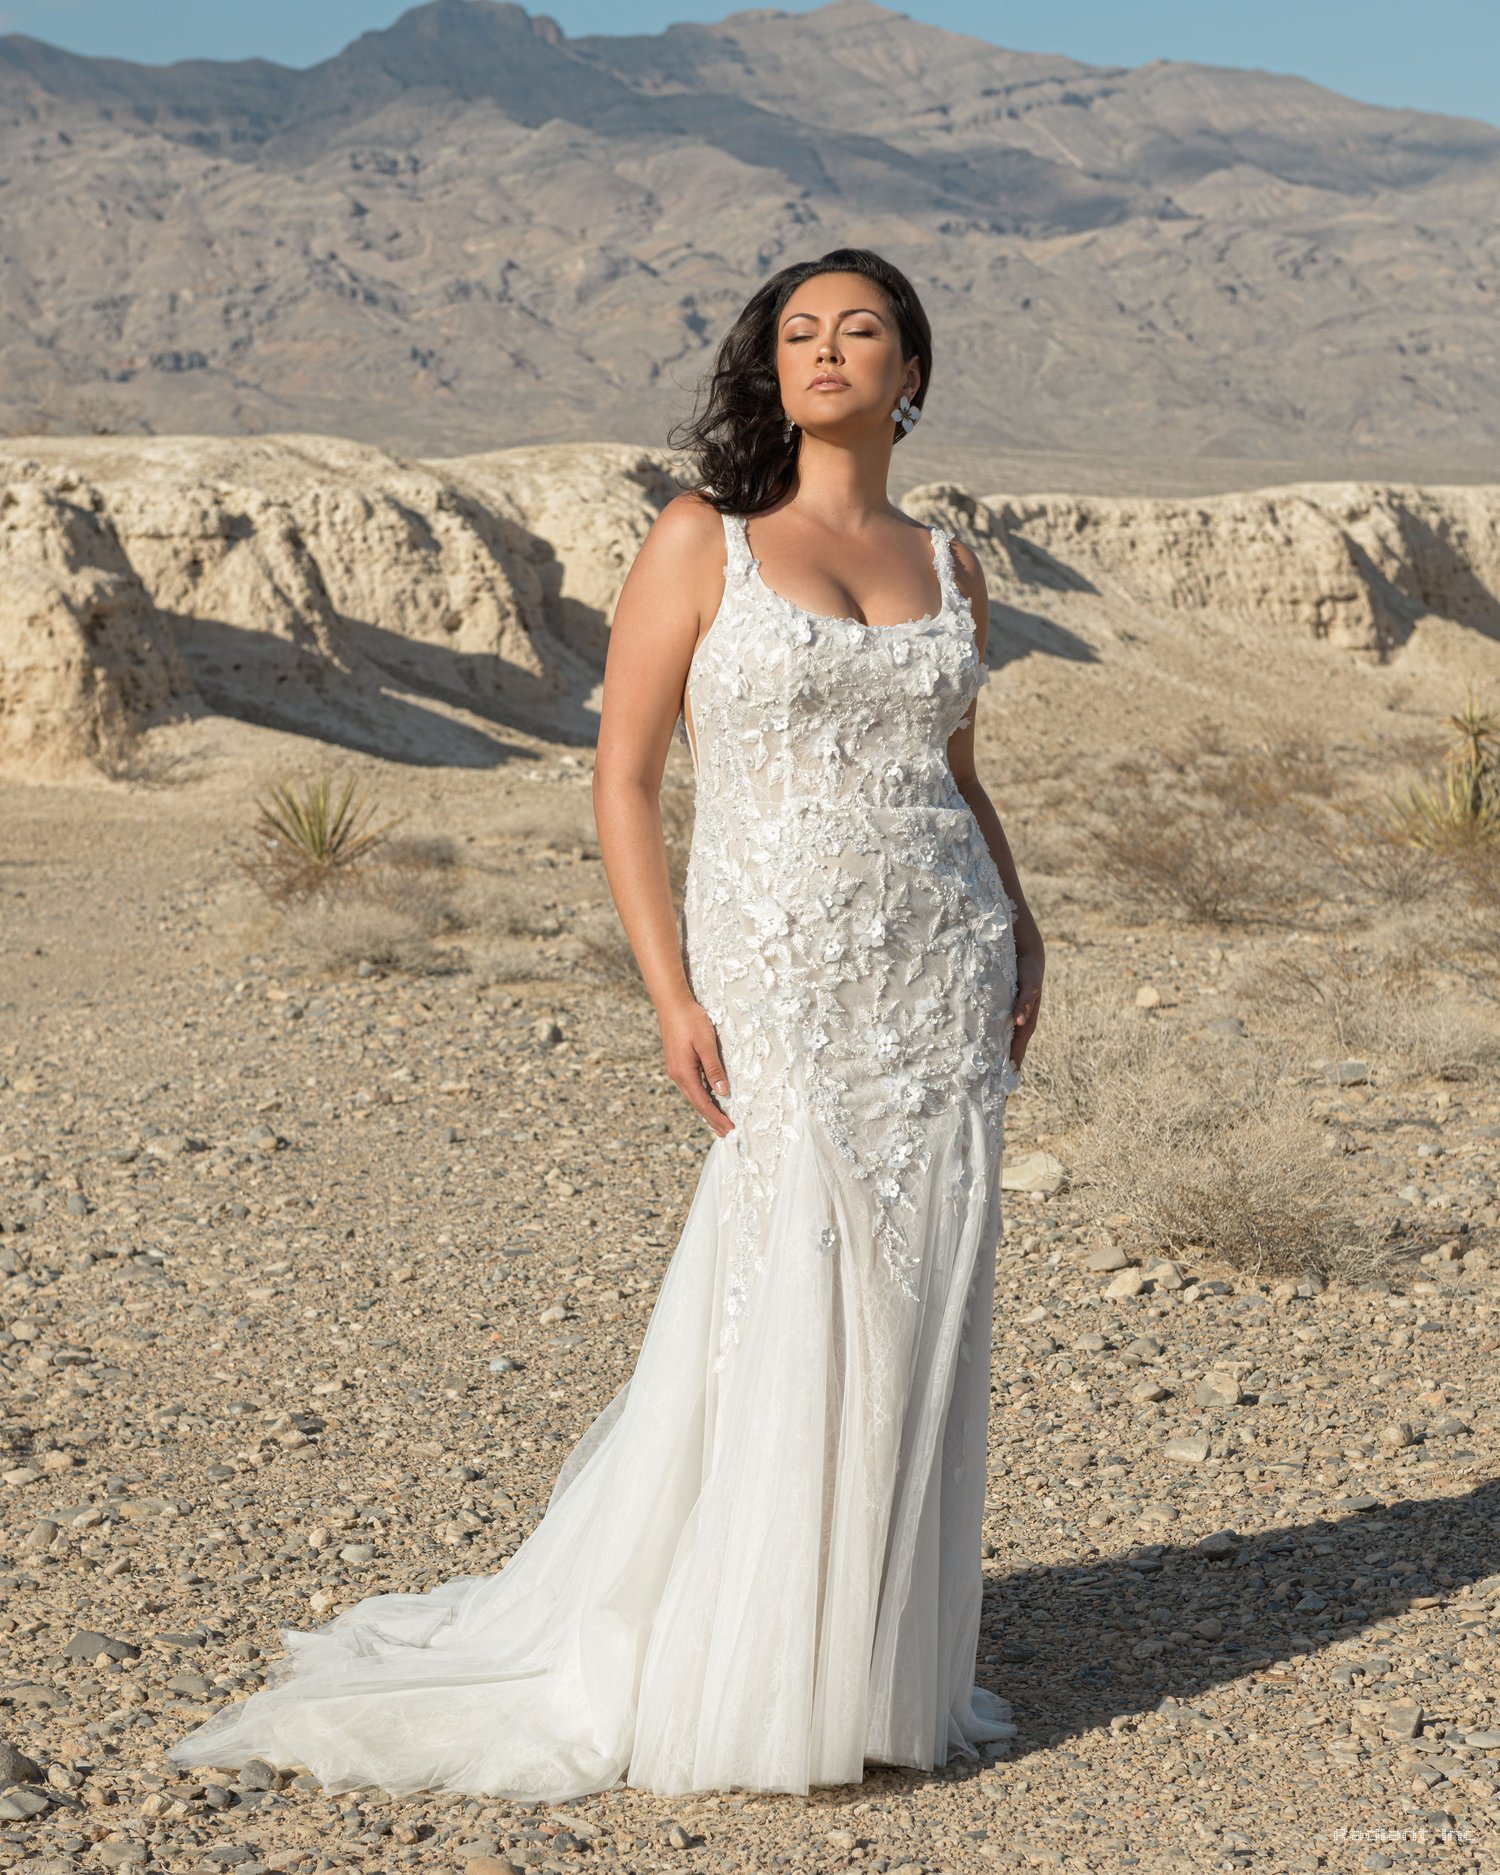 Dany-Tabet-Girl-Bridal-Plus-Size-Curvy-Wedding-Dresses-Indiana-Illinois-New-Jersey-Brides-by-Young-Stella.jpeg